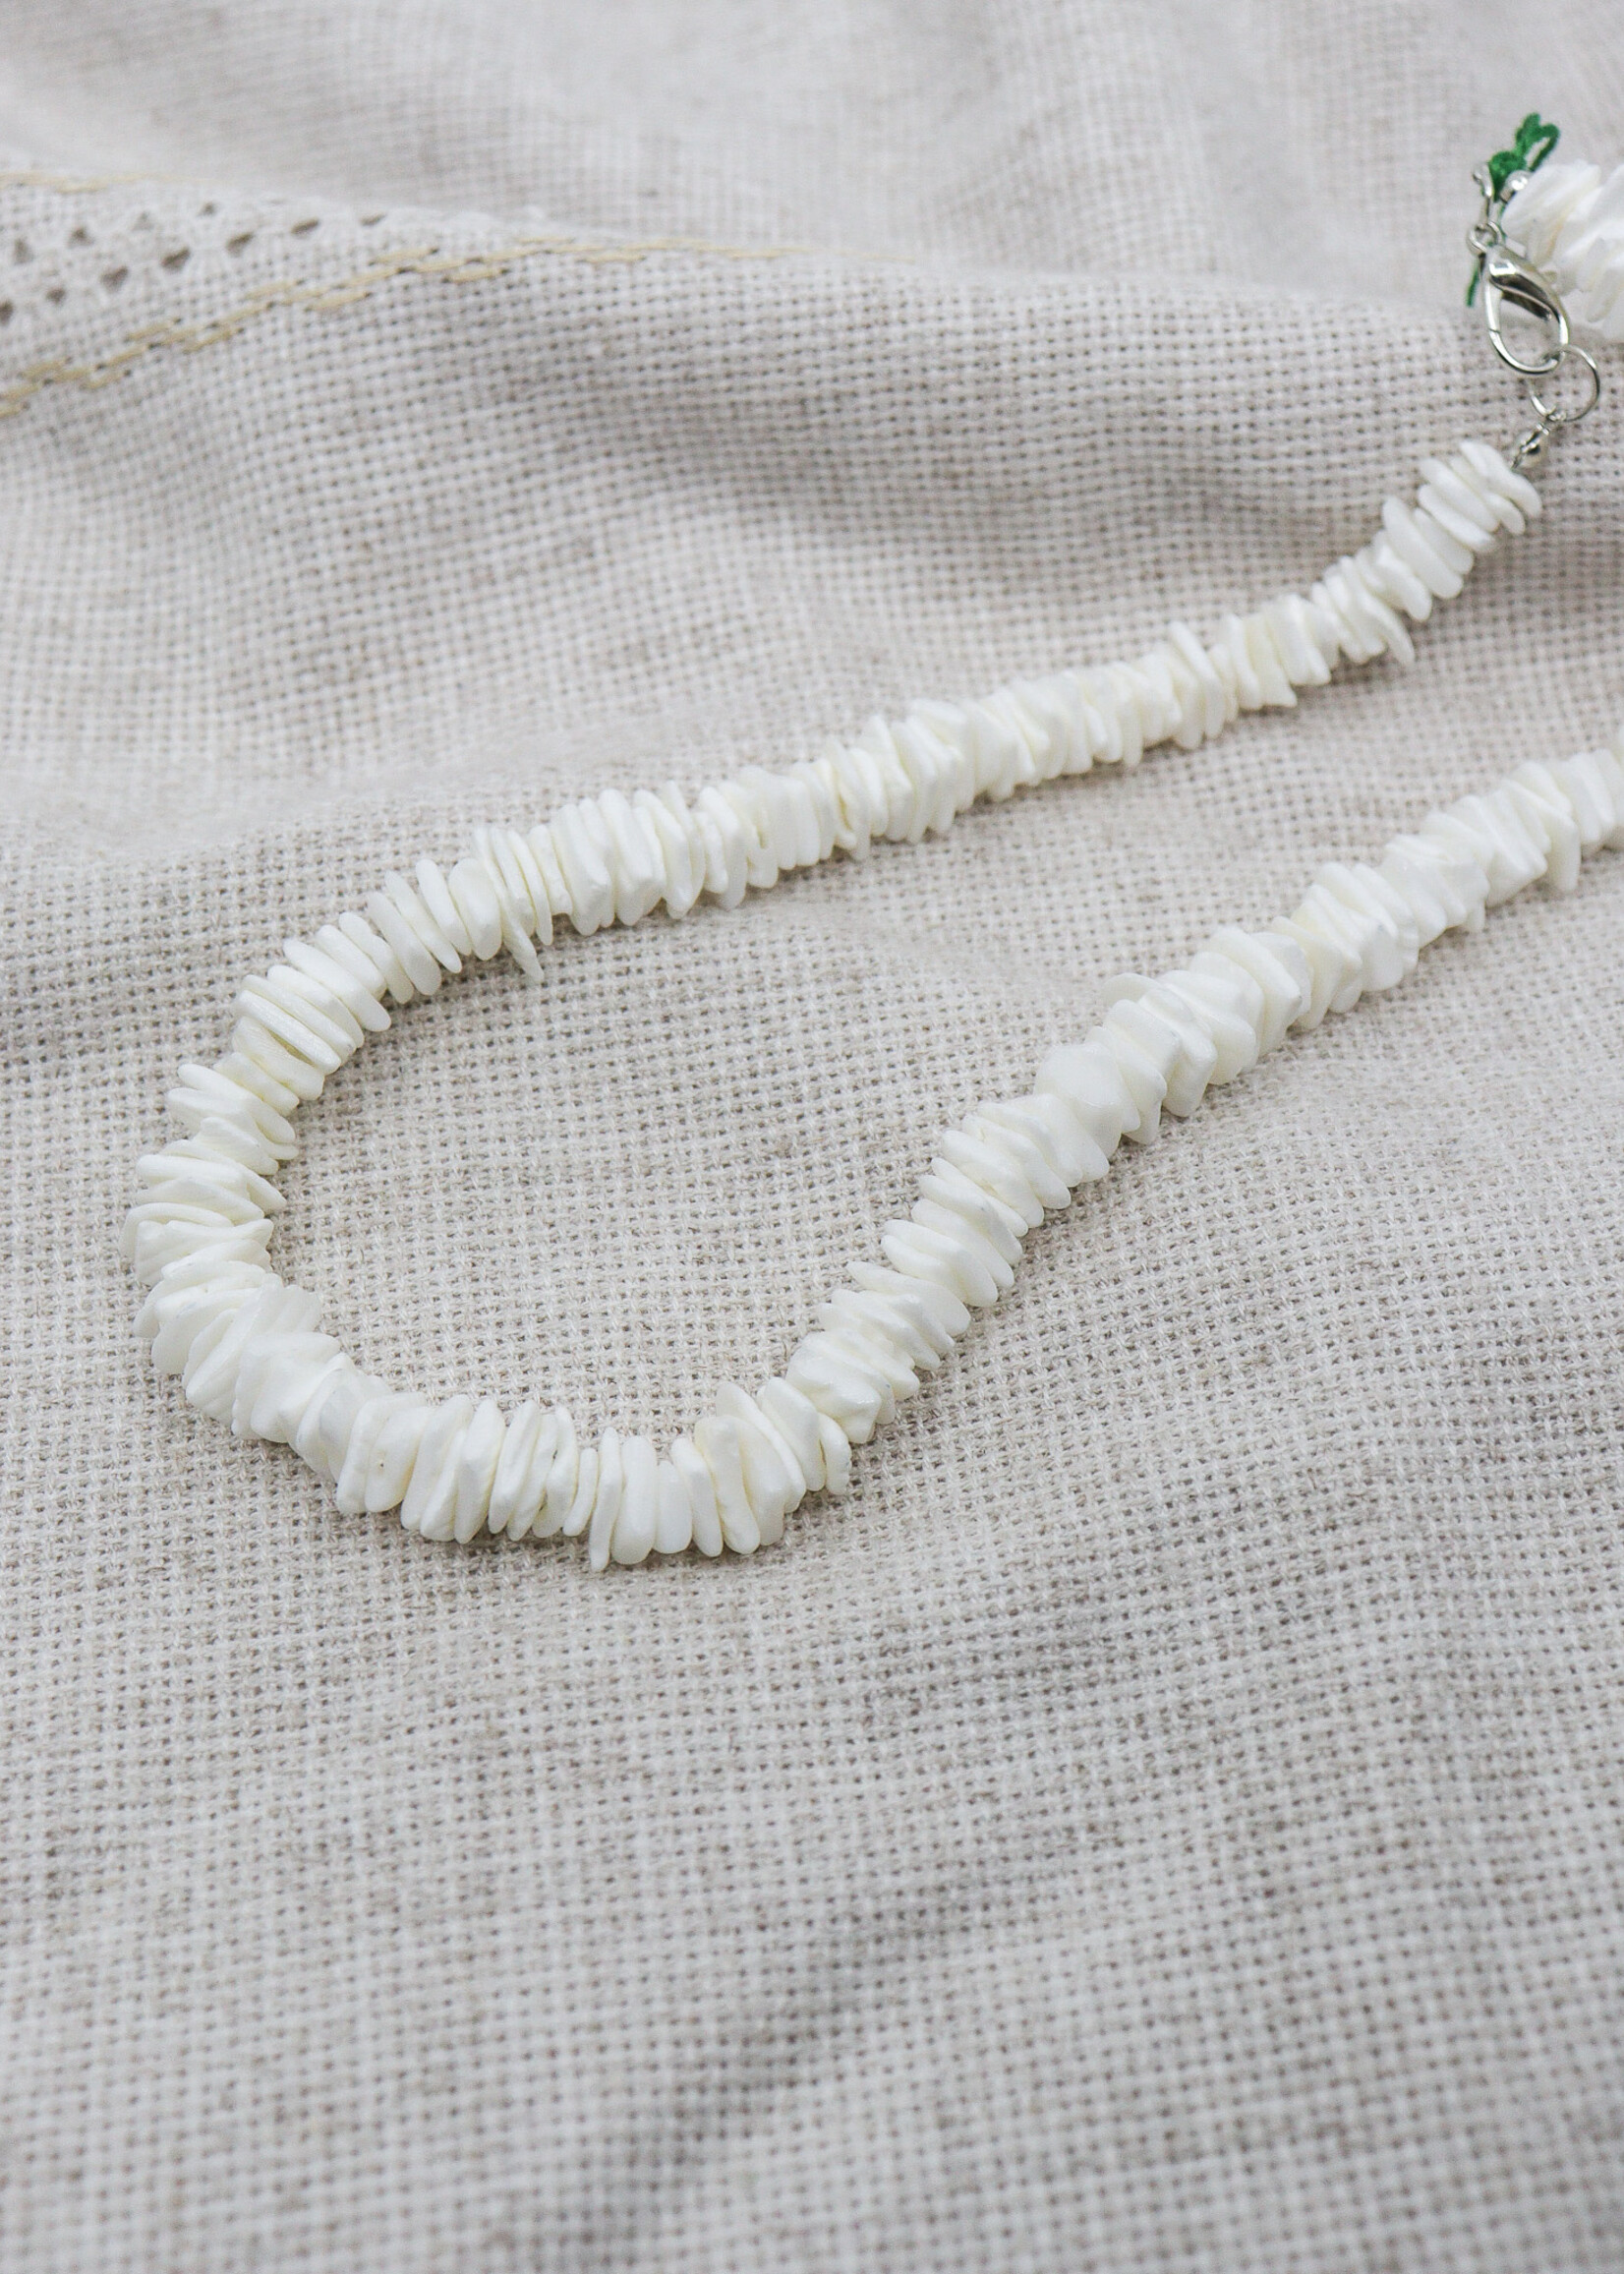 ACCESSORIES - Necklace, White Puka Shell